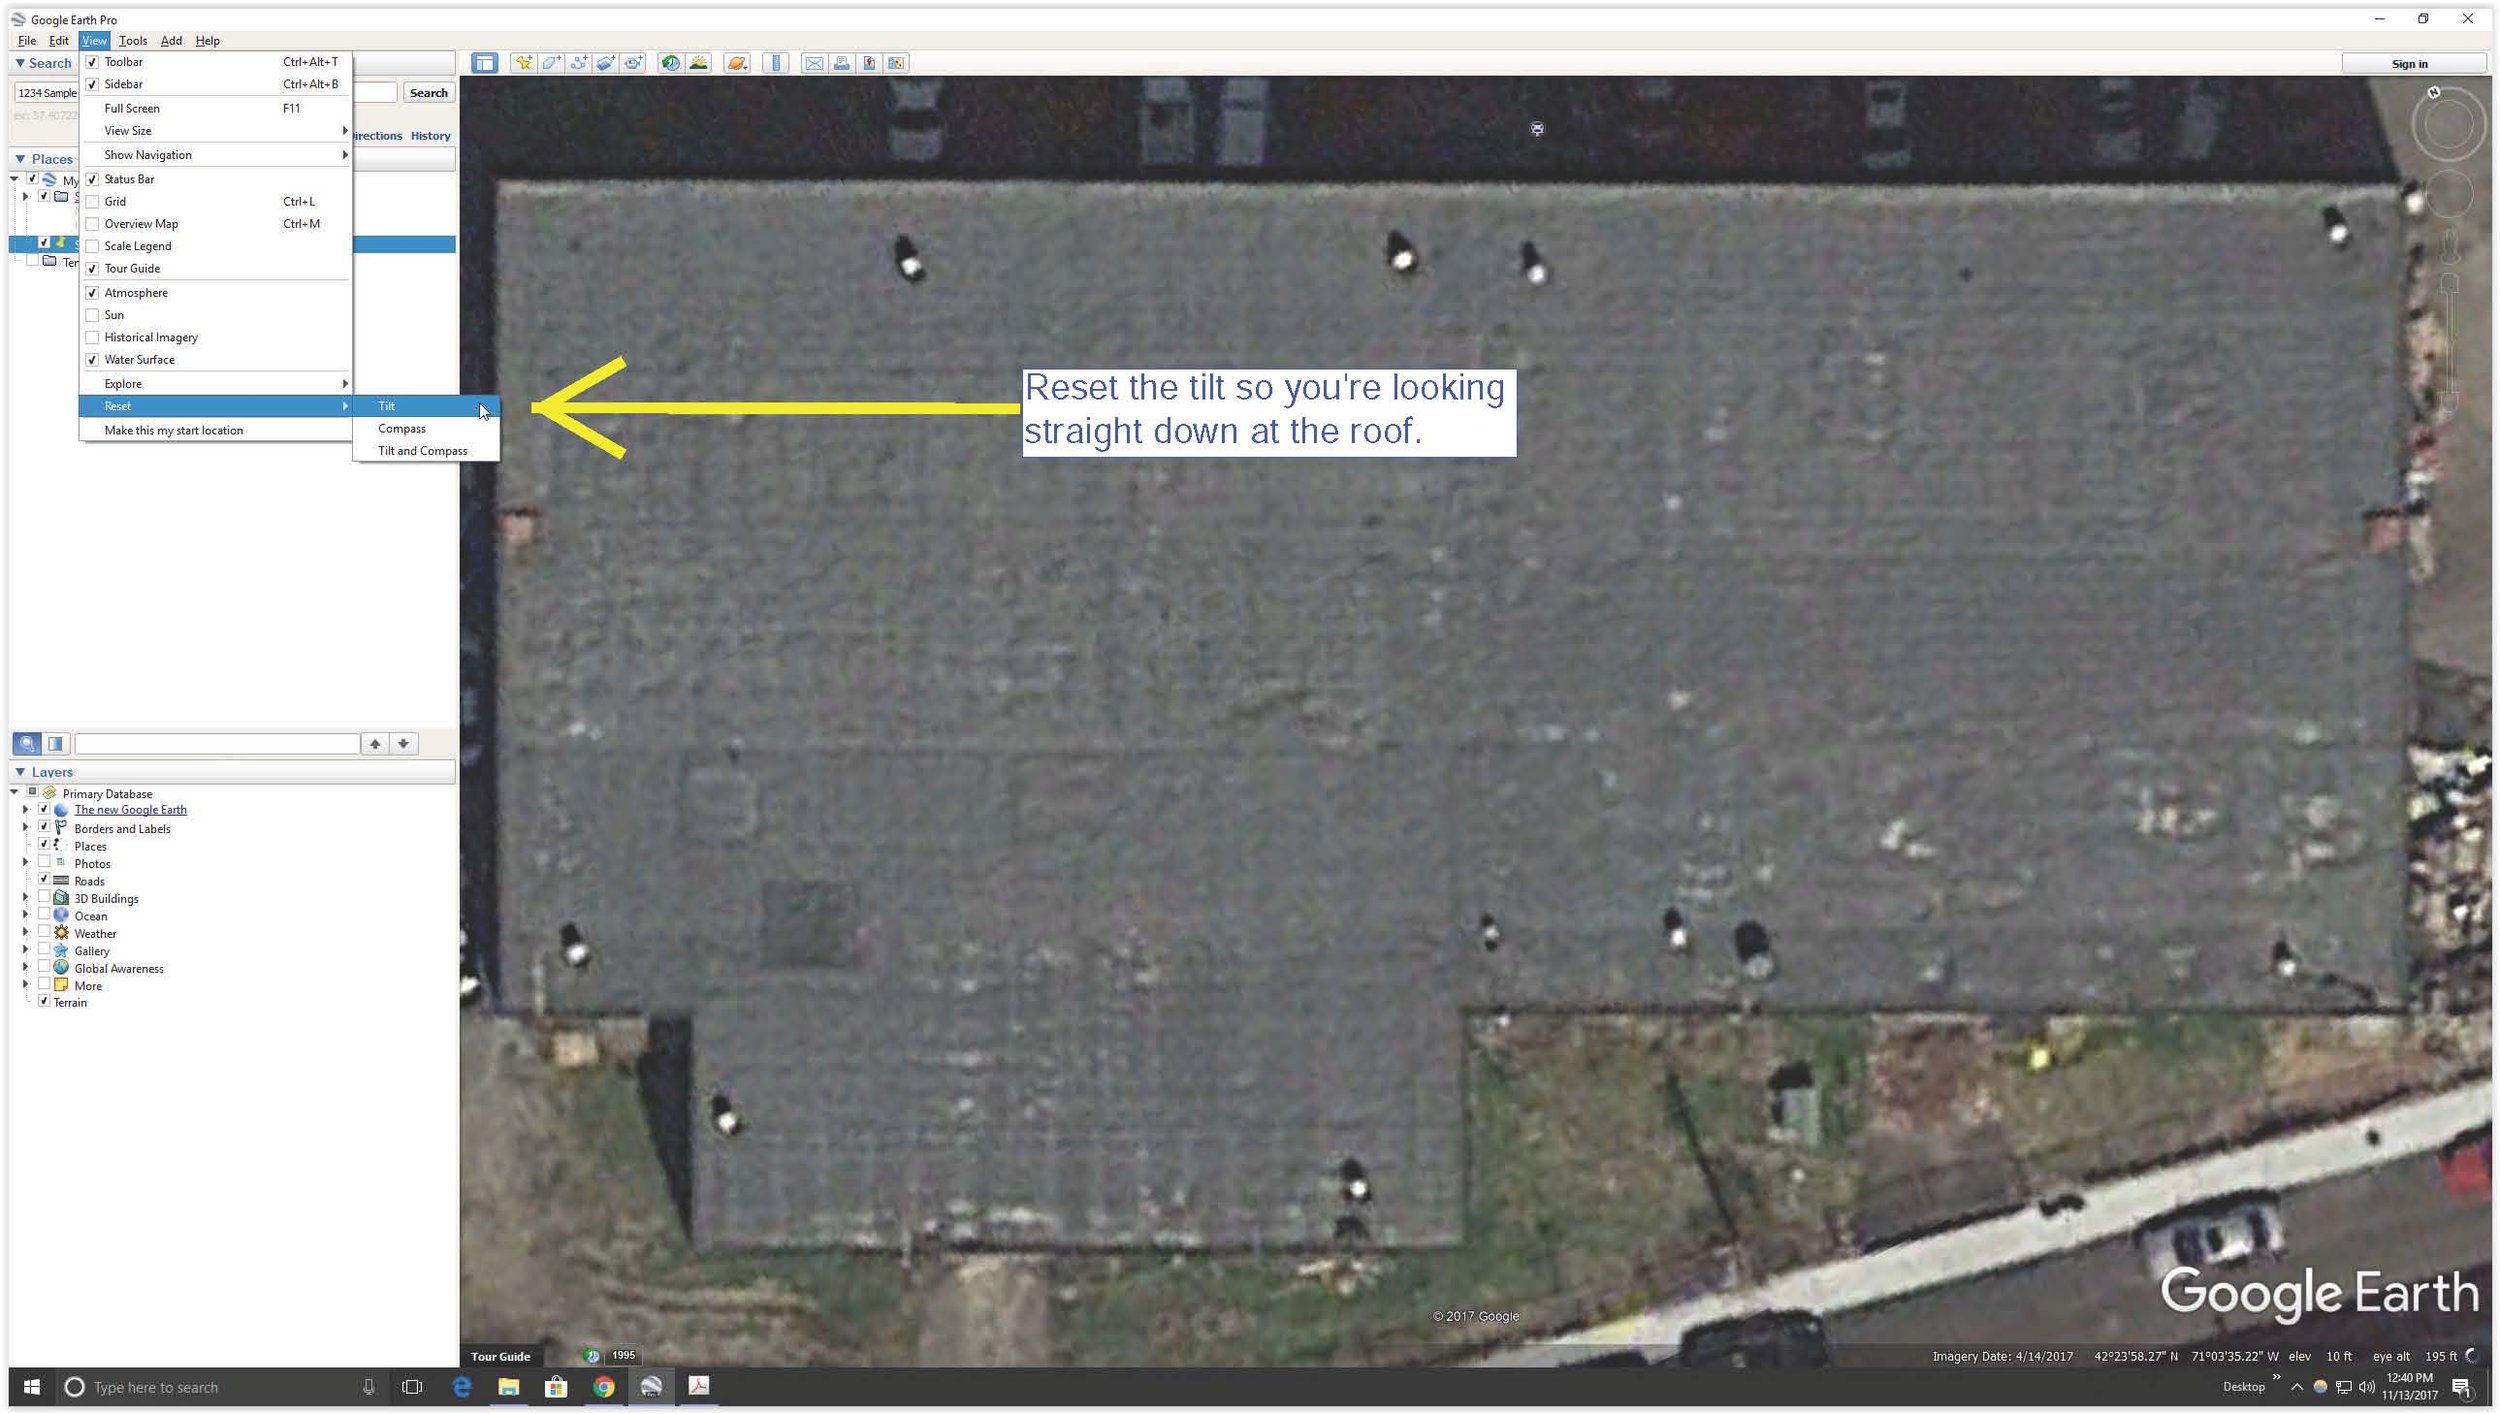 Location of the "Reset Tilt" option in Google Earth.